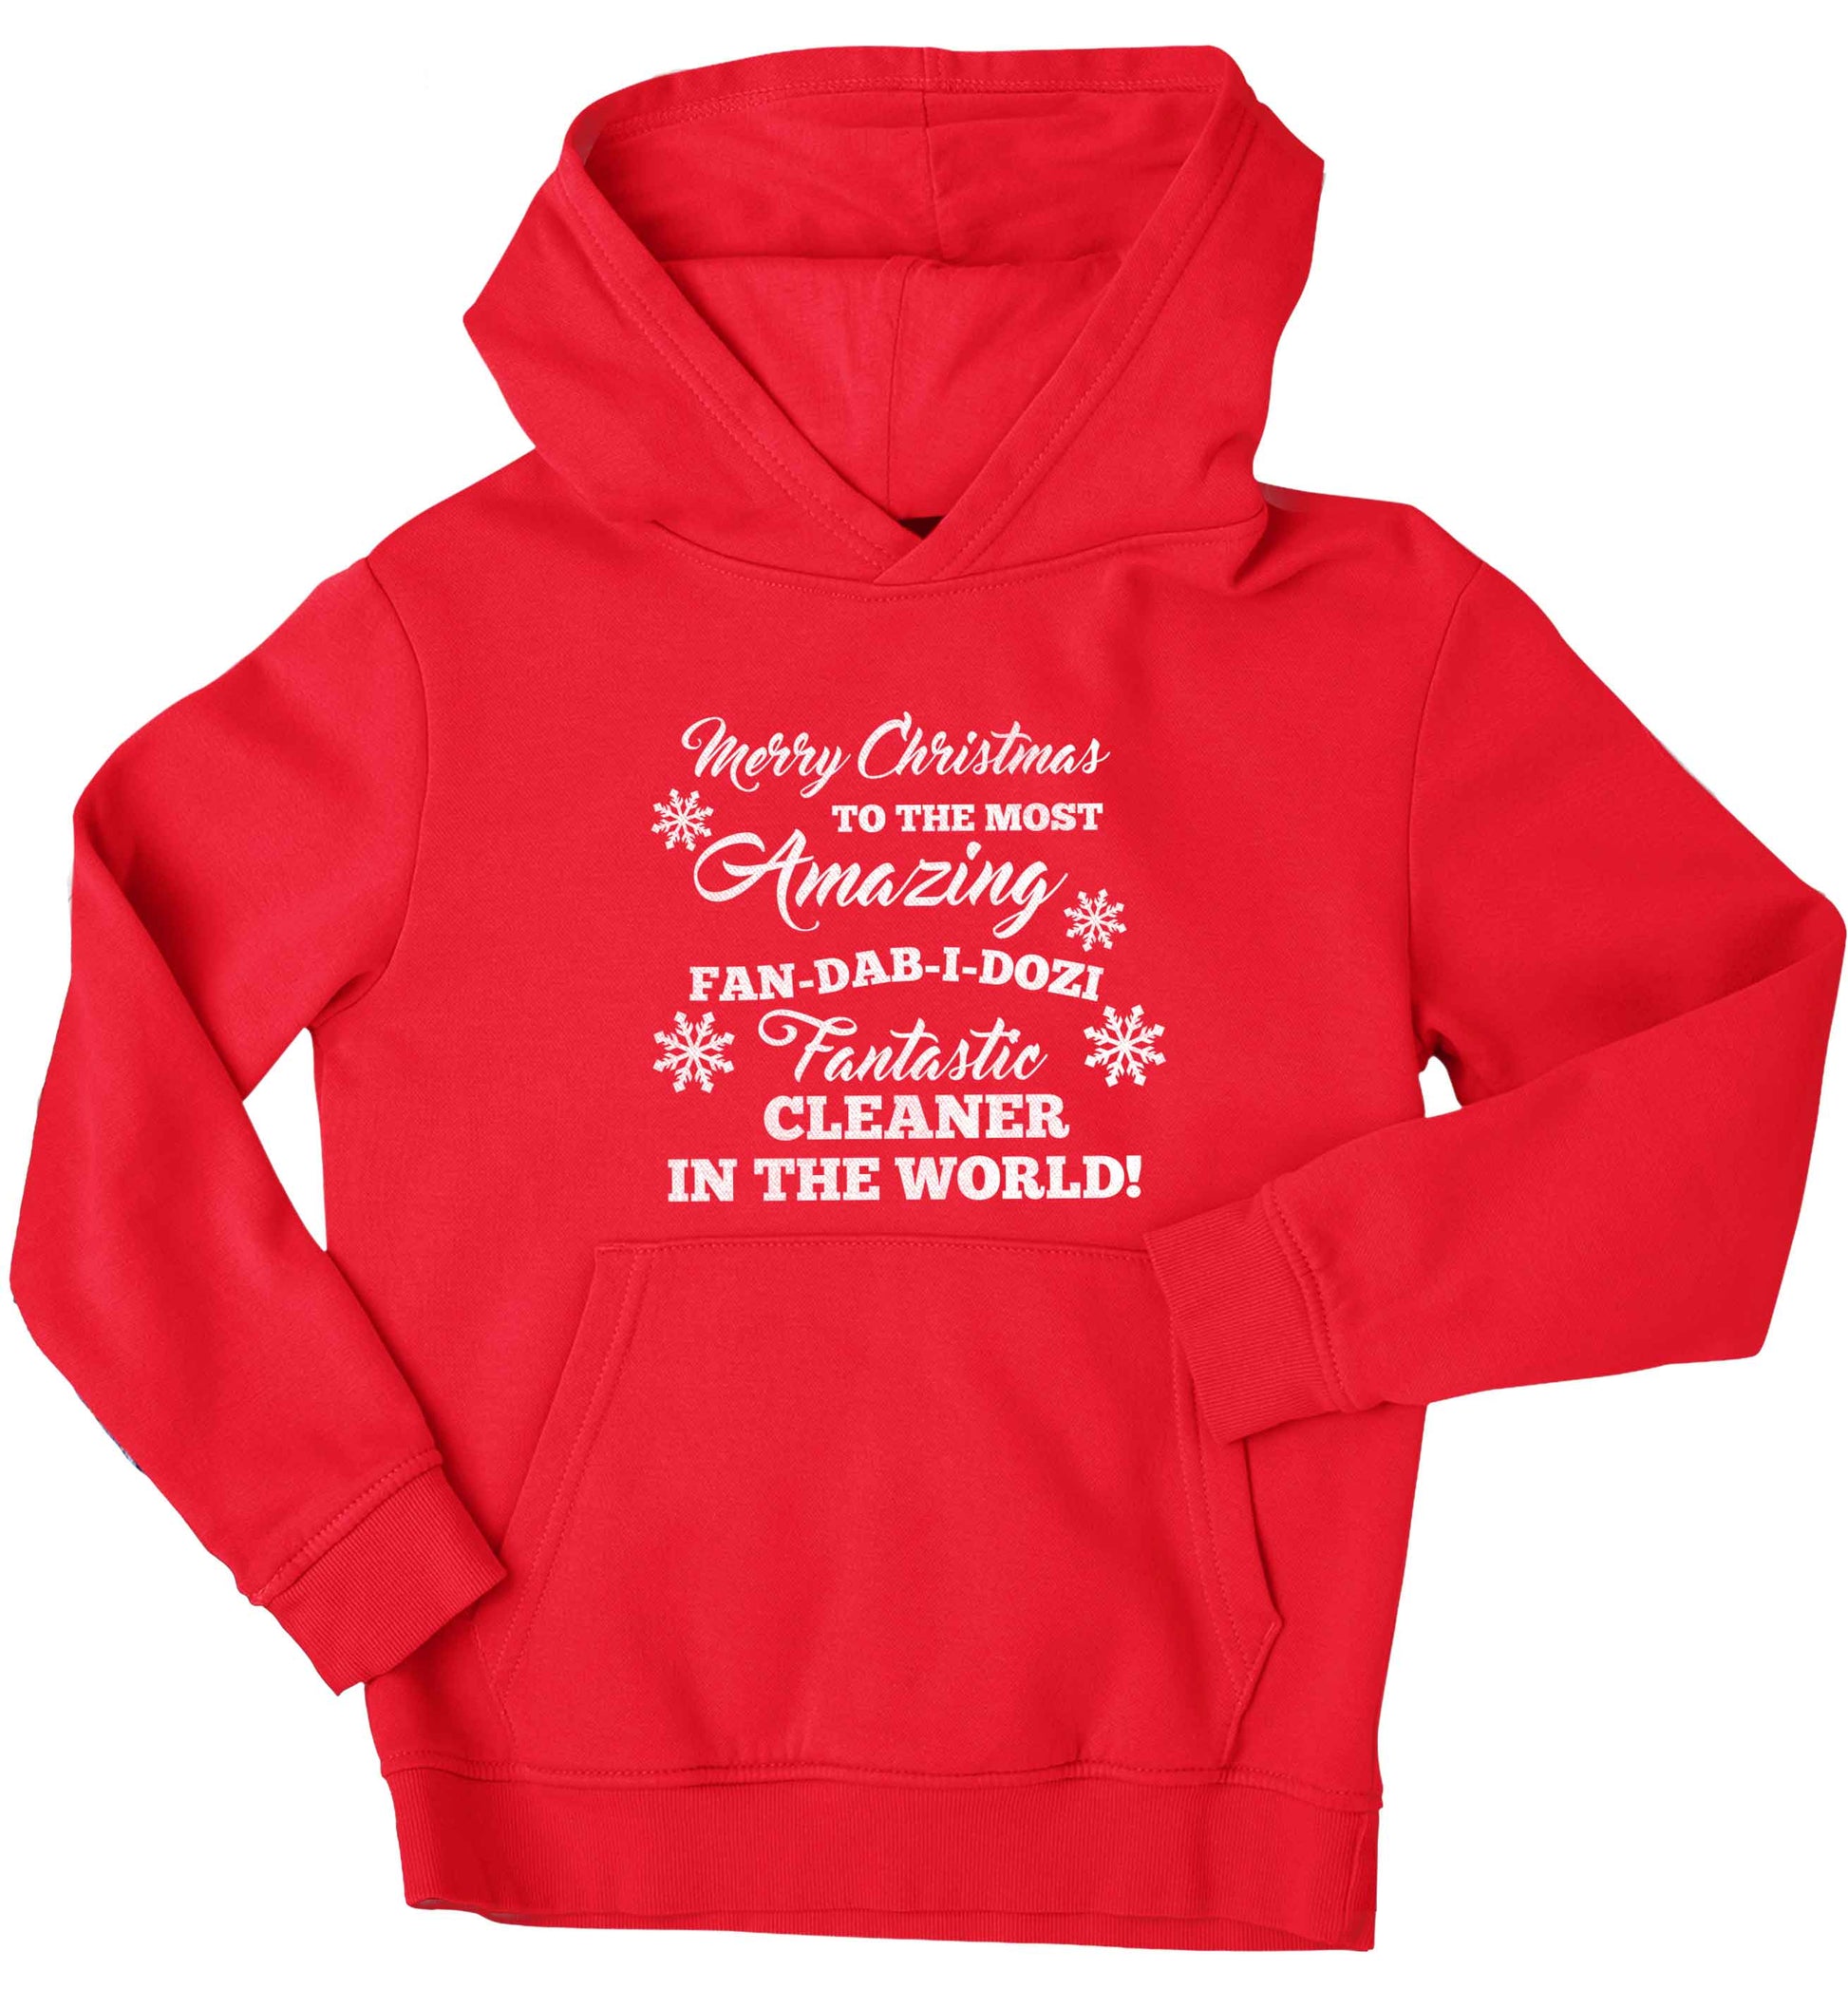 Merry Christmas to the most amazing fan-dab-i-dozi fantasic cleaner in the world children's red hoodie 12-13 Years